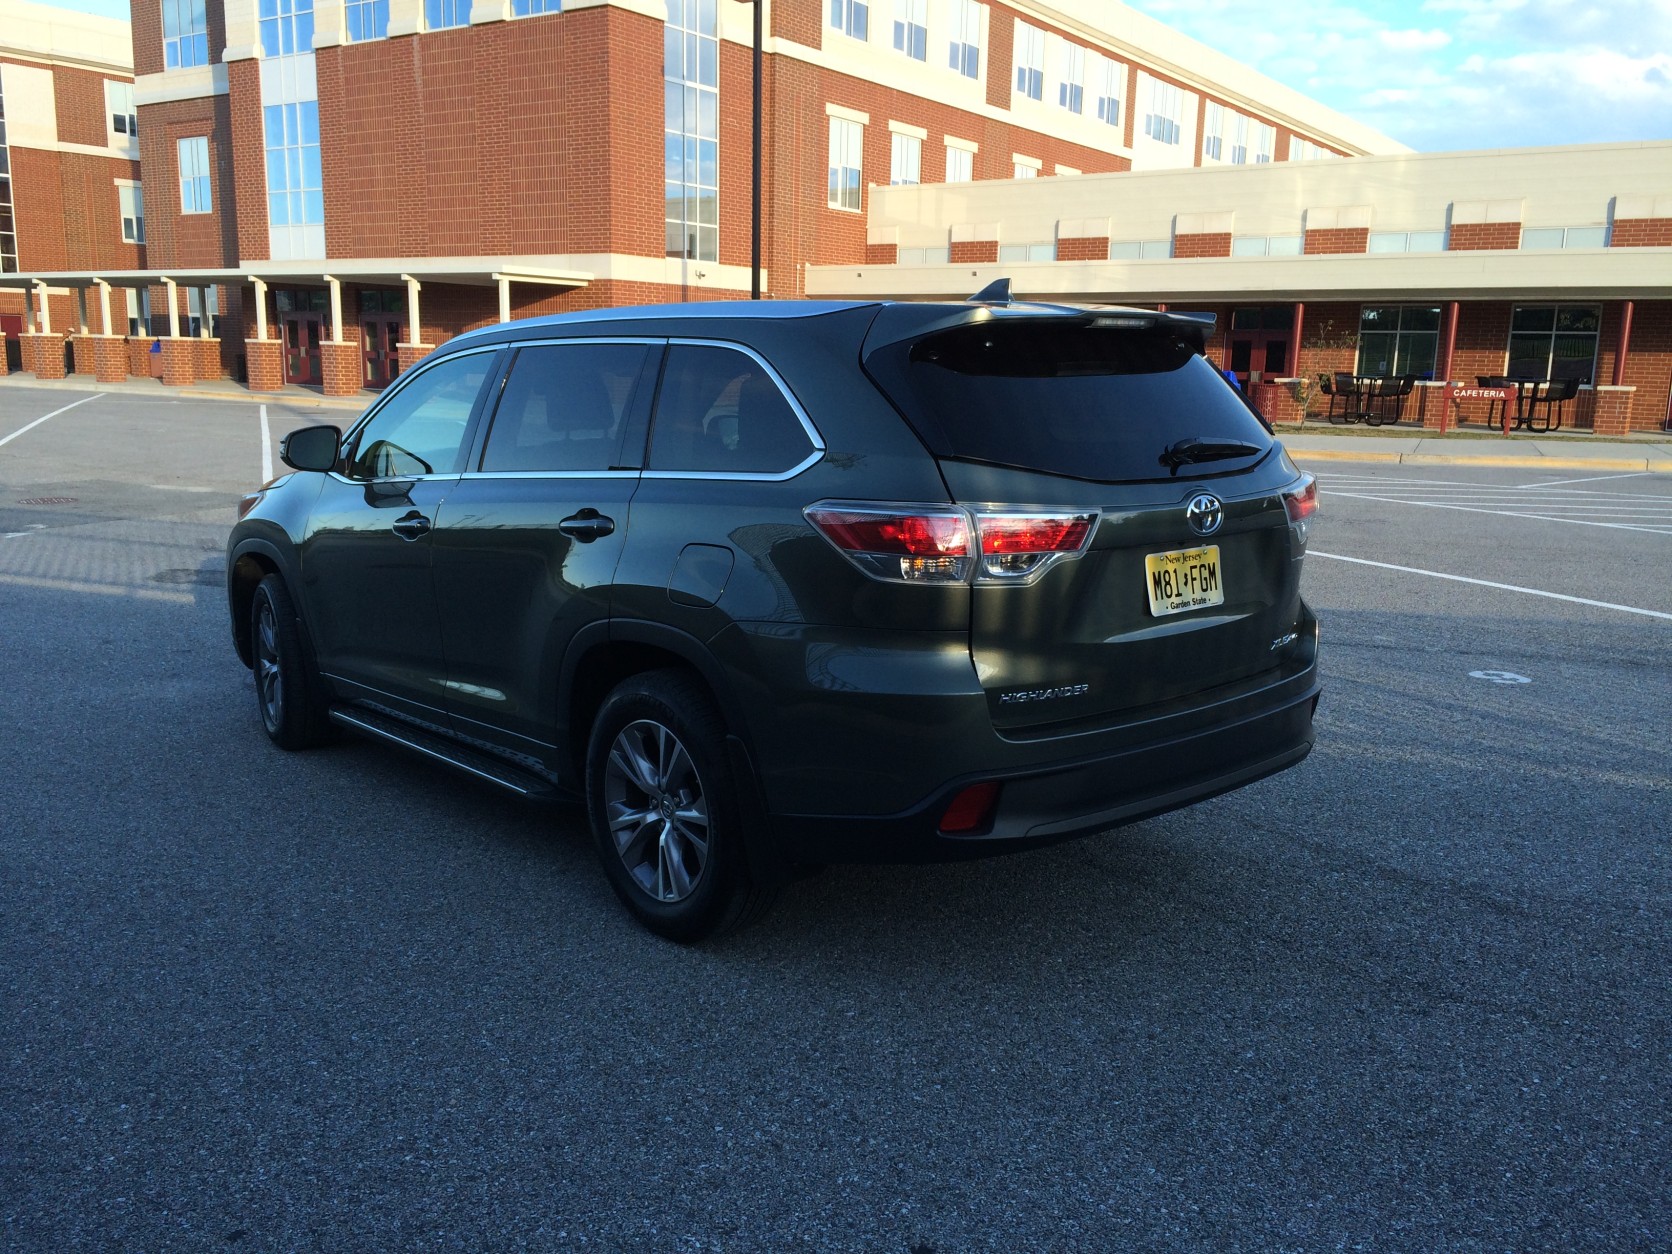 Last year, Toyota redesigned the popular Highlander and added a bit more curb appeal. (WTOP/Mike Parris)